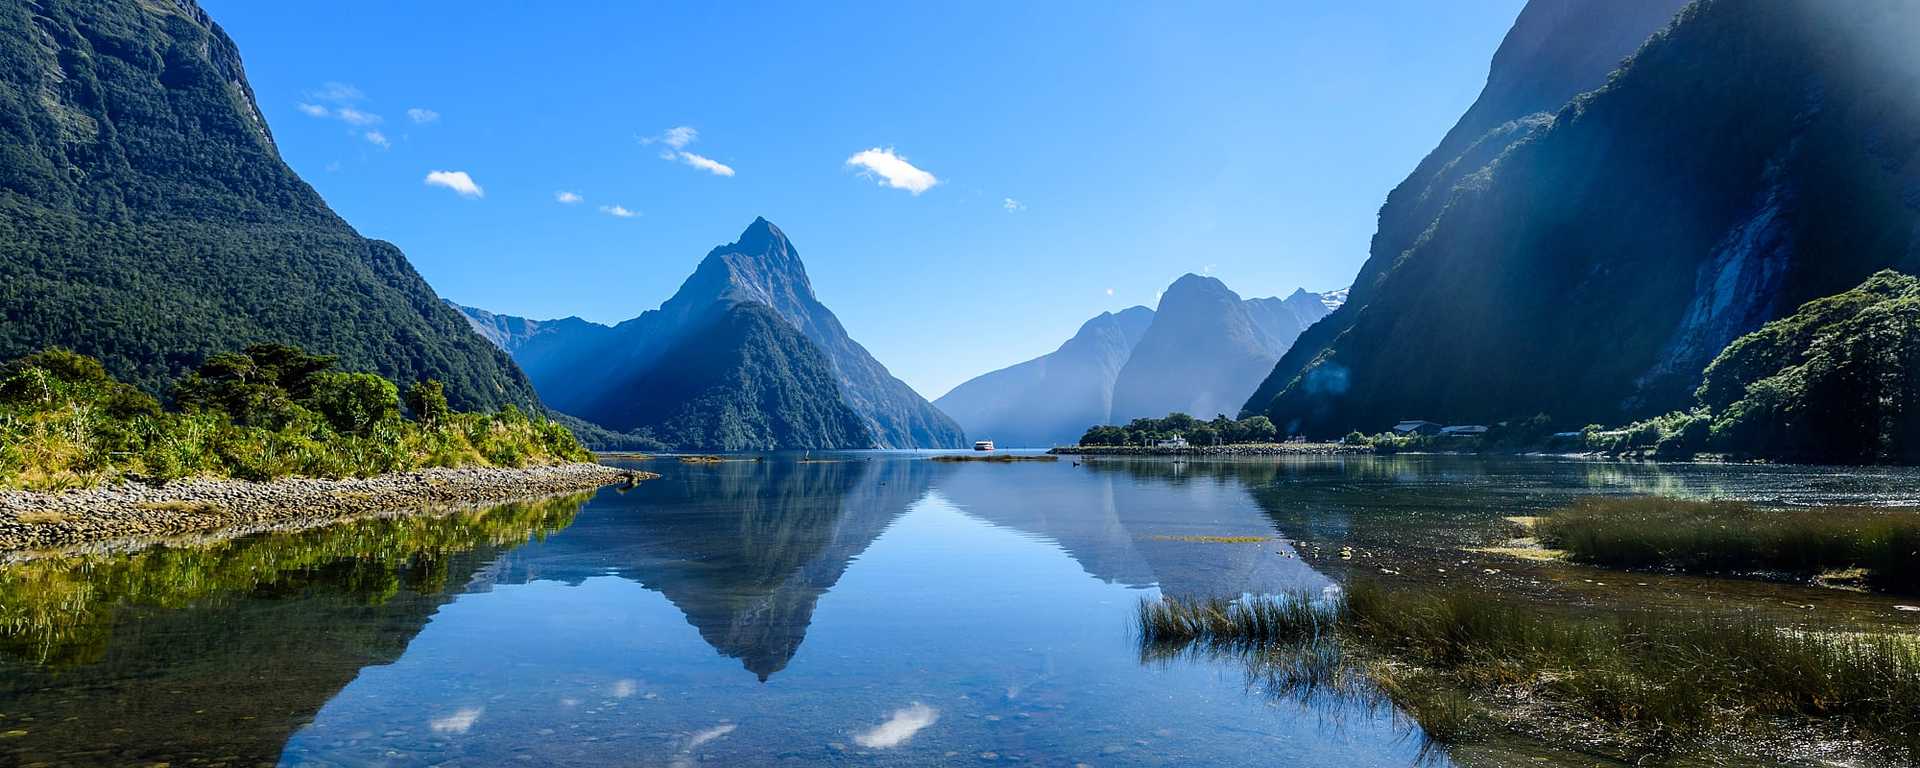 Milford Sound he southwest of New Zealand’s South Island